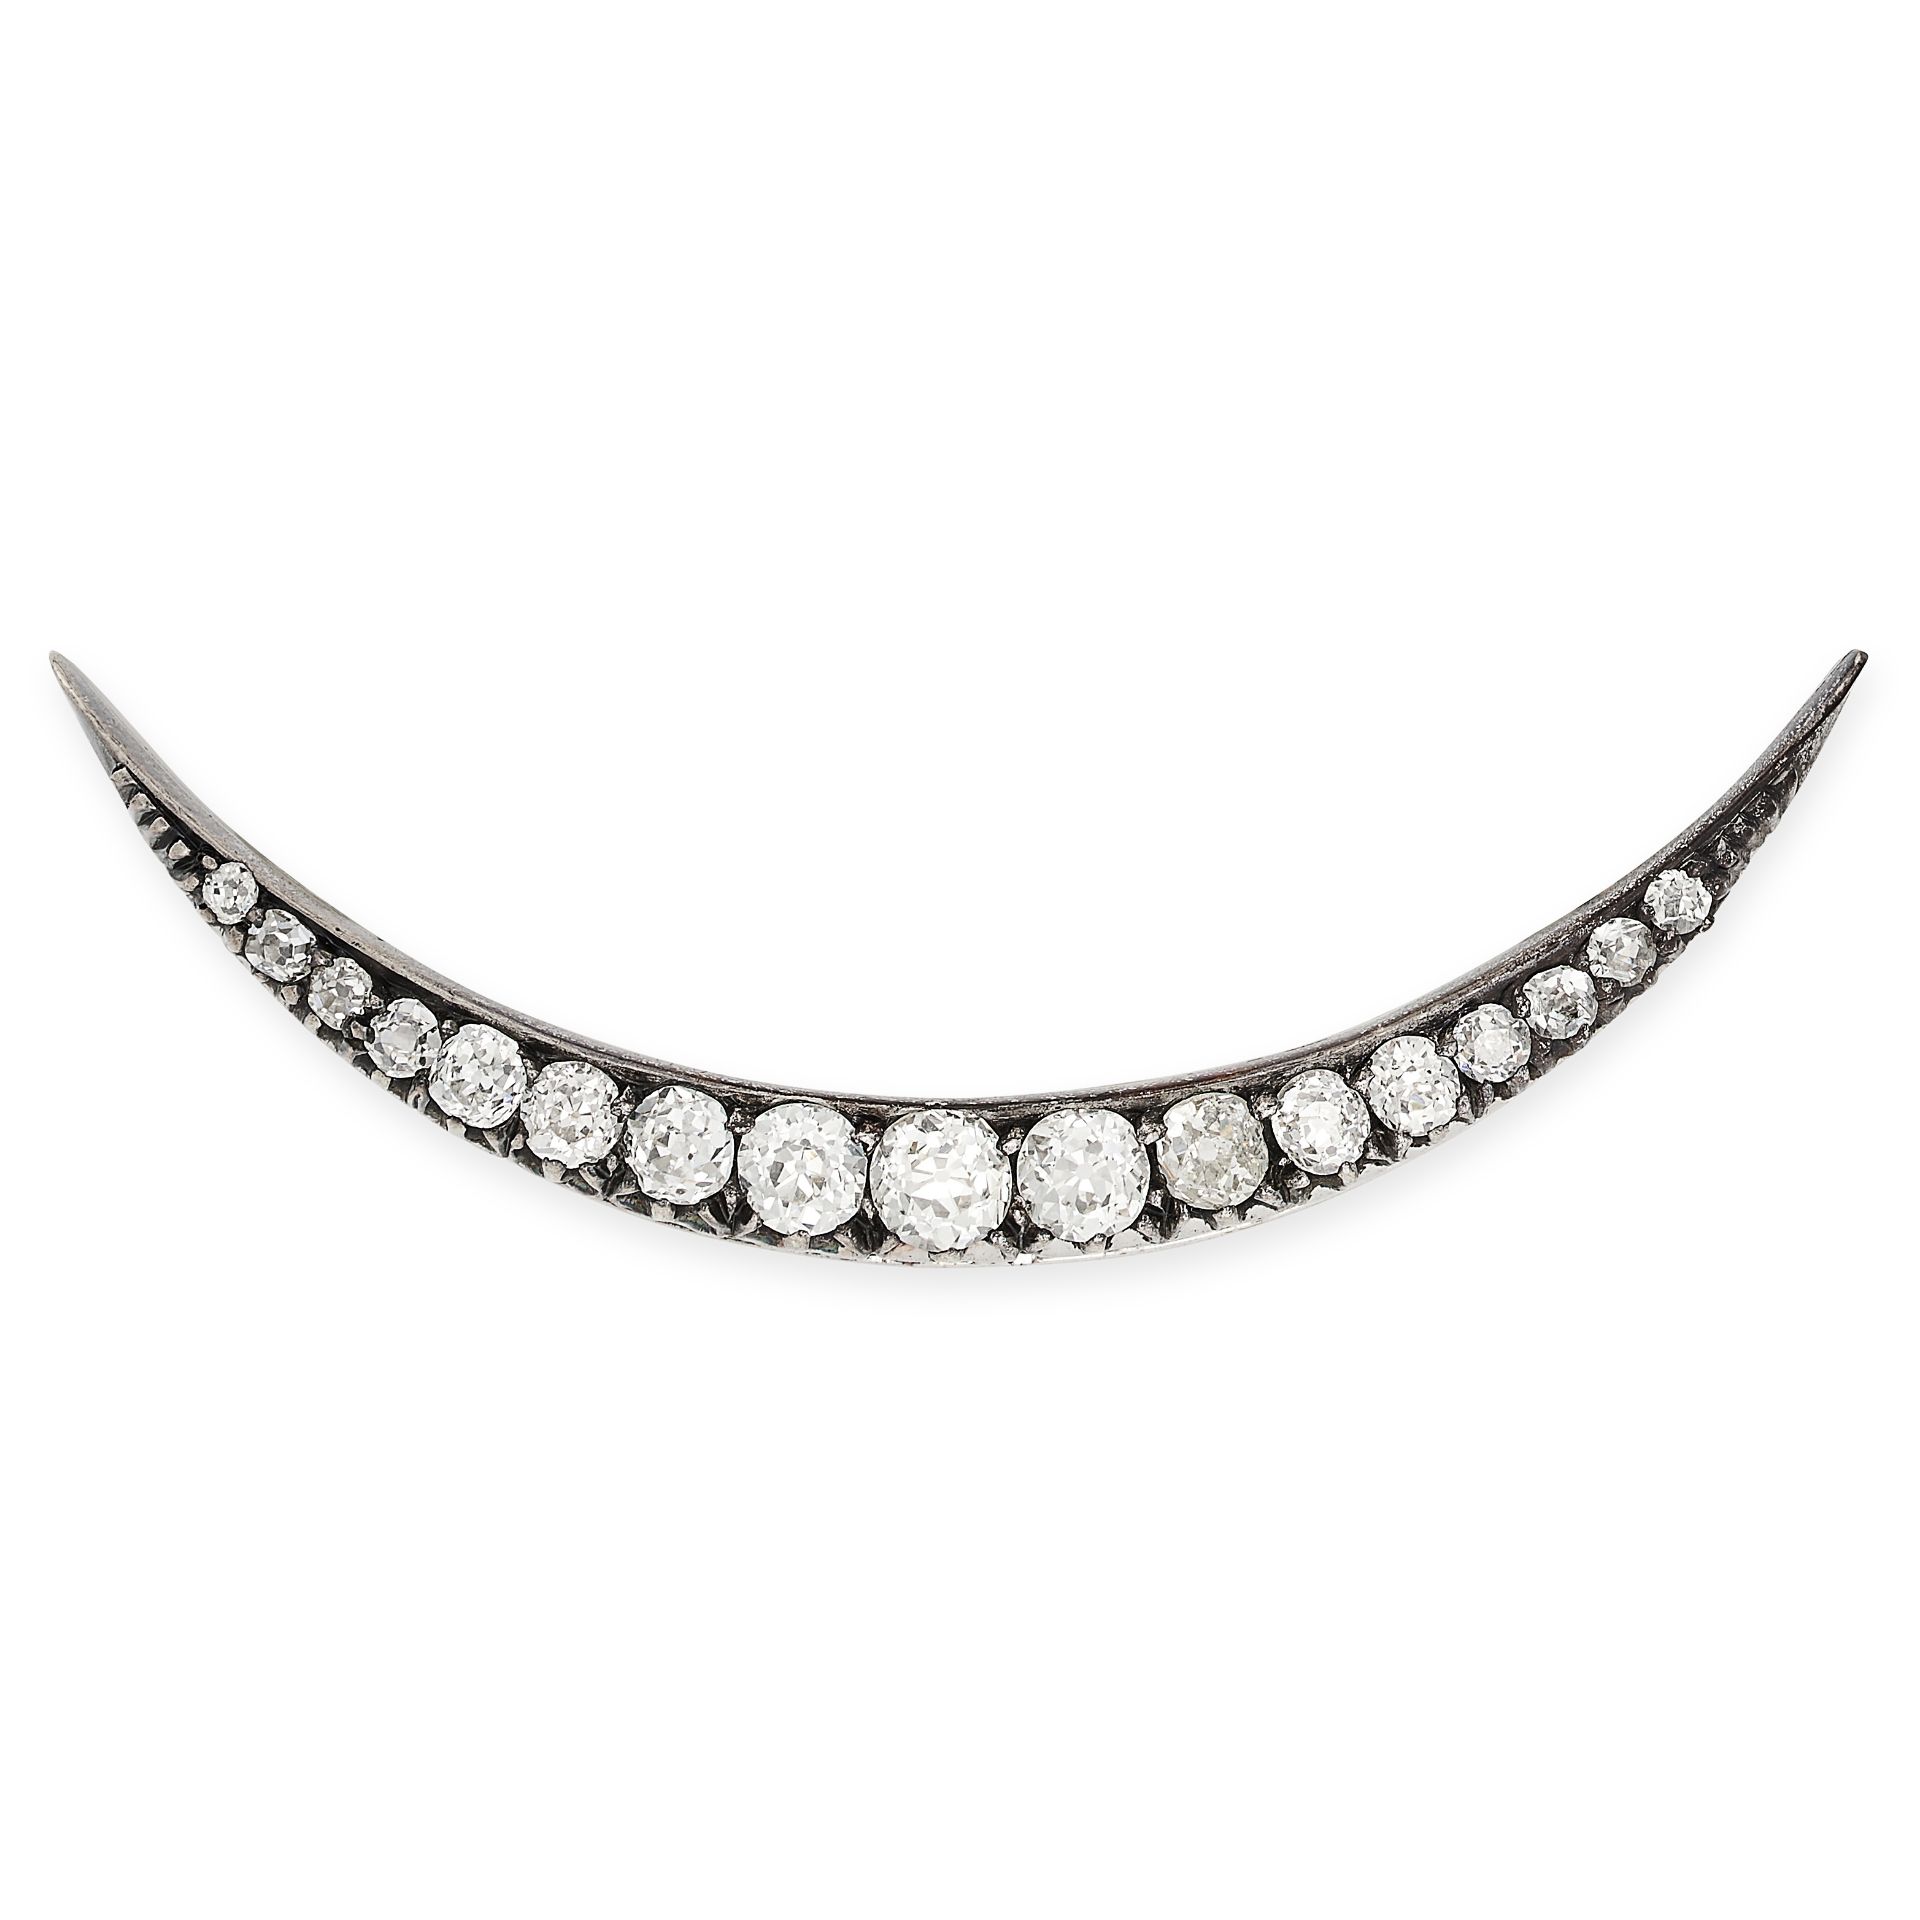 AN ANTIQUE VICTORIAN DIAMOND CRESCENT MOON BROOCH in yellow gold and silver, set with a row of gr...